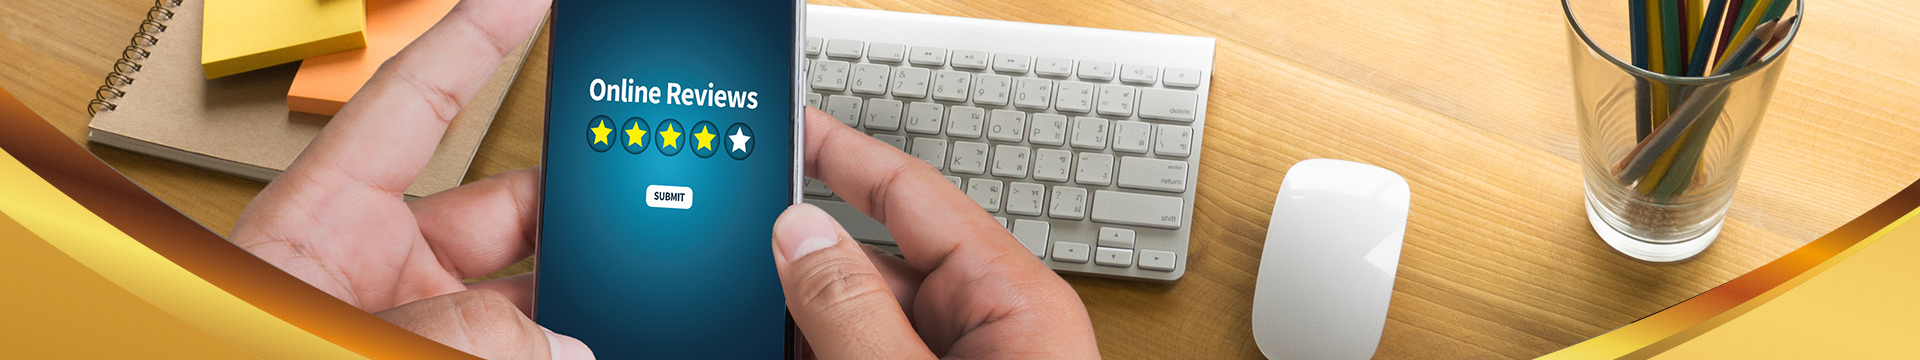 Male hands hold a phone over the a smooth silver and white keyboard with an all white mouse